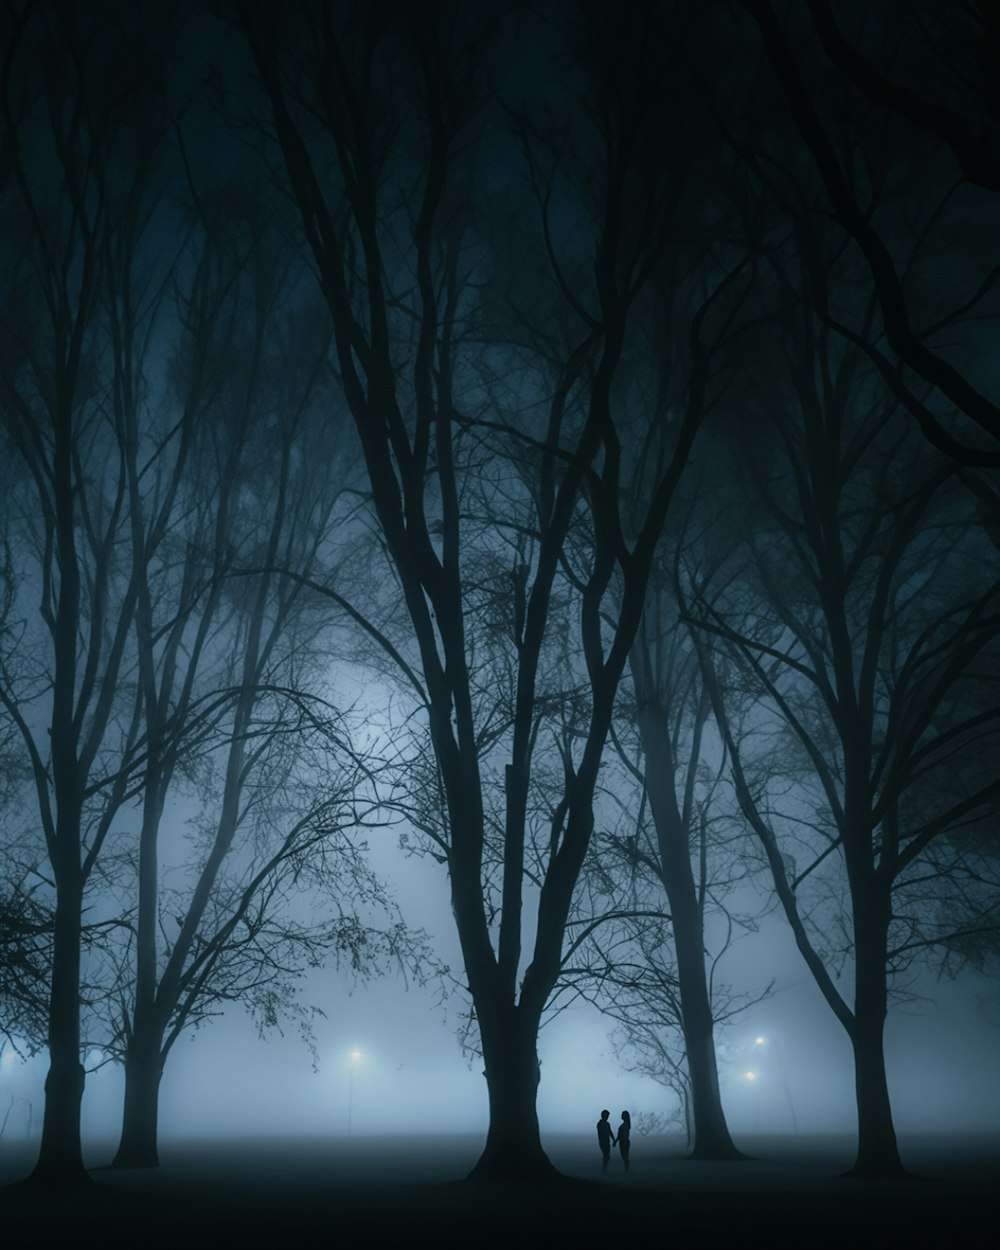 two people are standing in the middle of a foggy forest